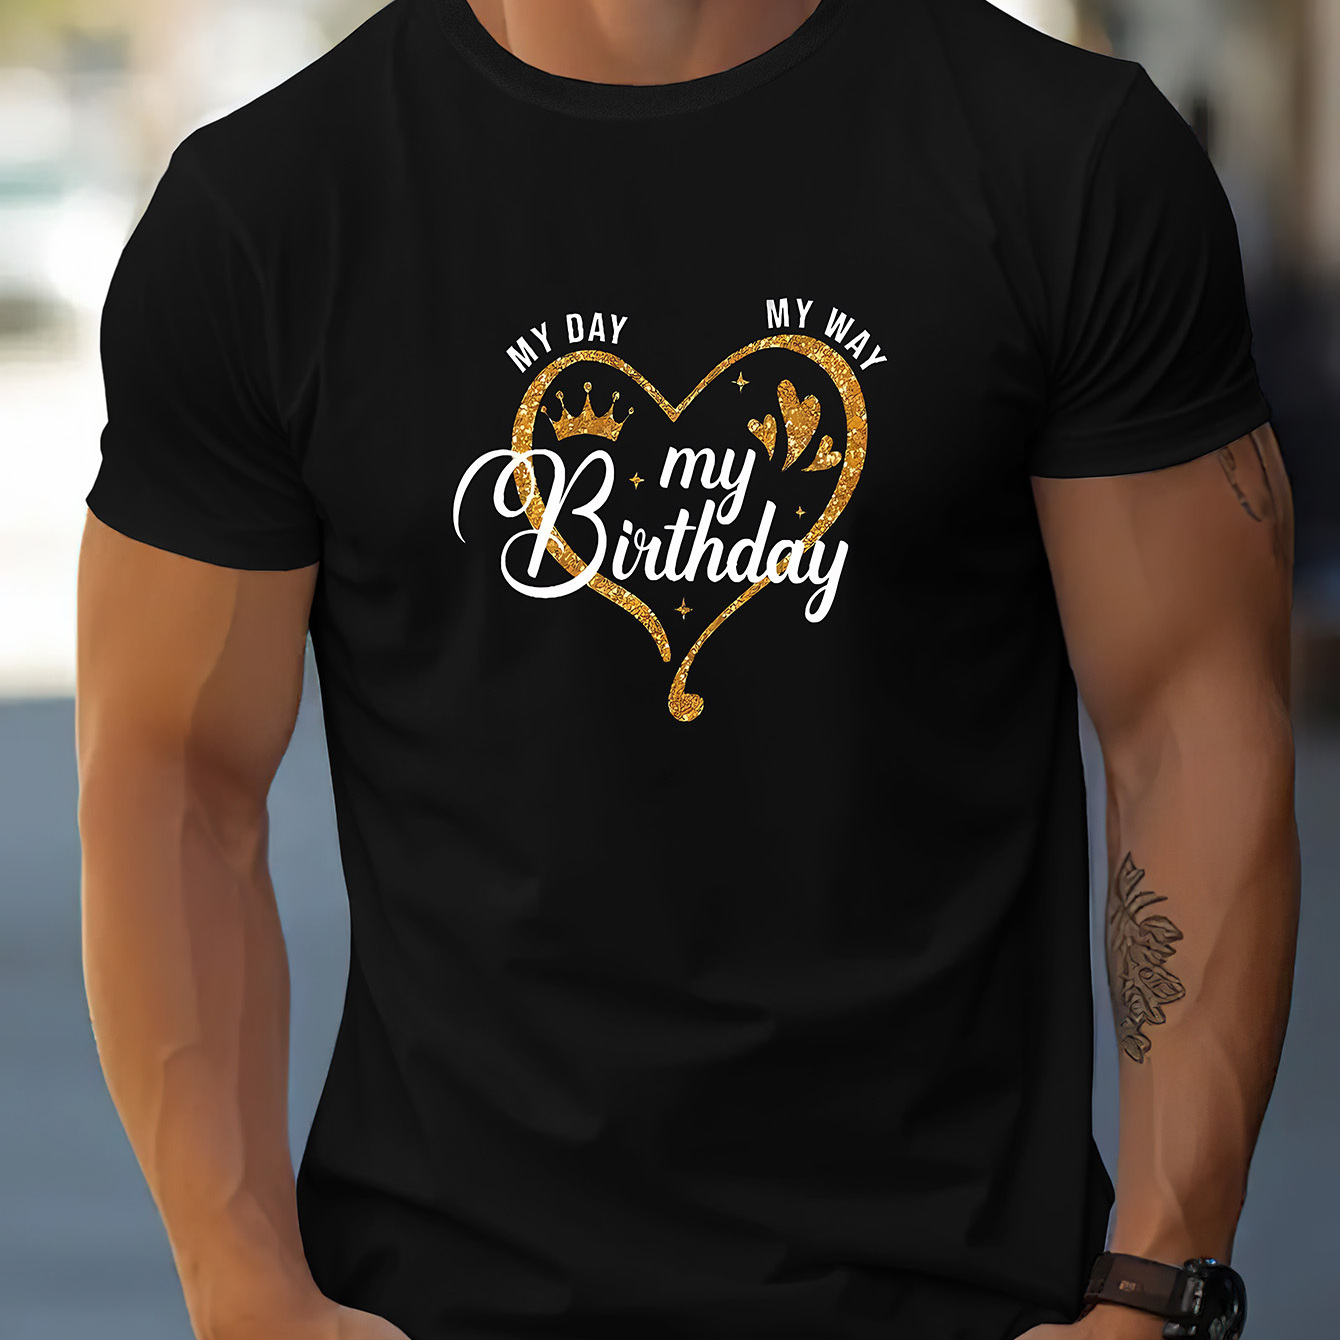 

My Birthday Print Men's Crew Neck Fashionable Short Sleeve Sports T-shirt, Comfortable And Versatile, For Summer And Spring, Athletic Style, Comfort Fit T-shirt, As Gifts